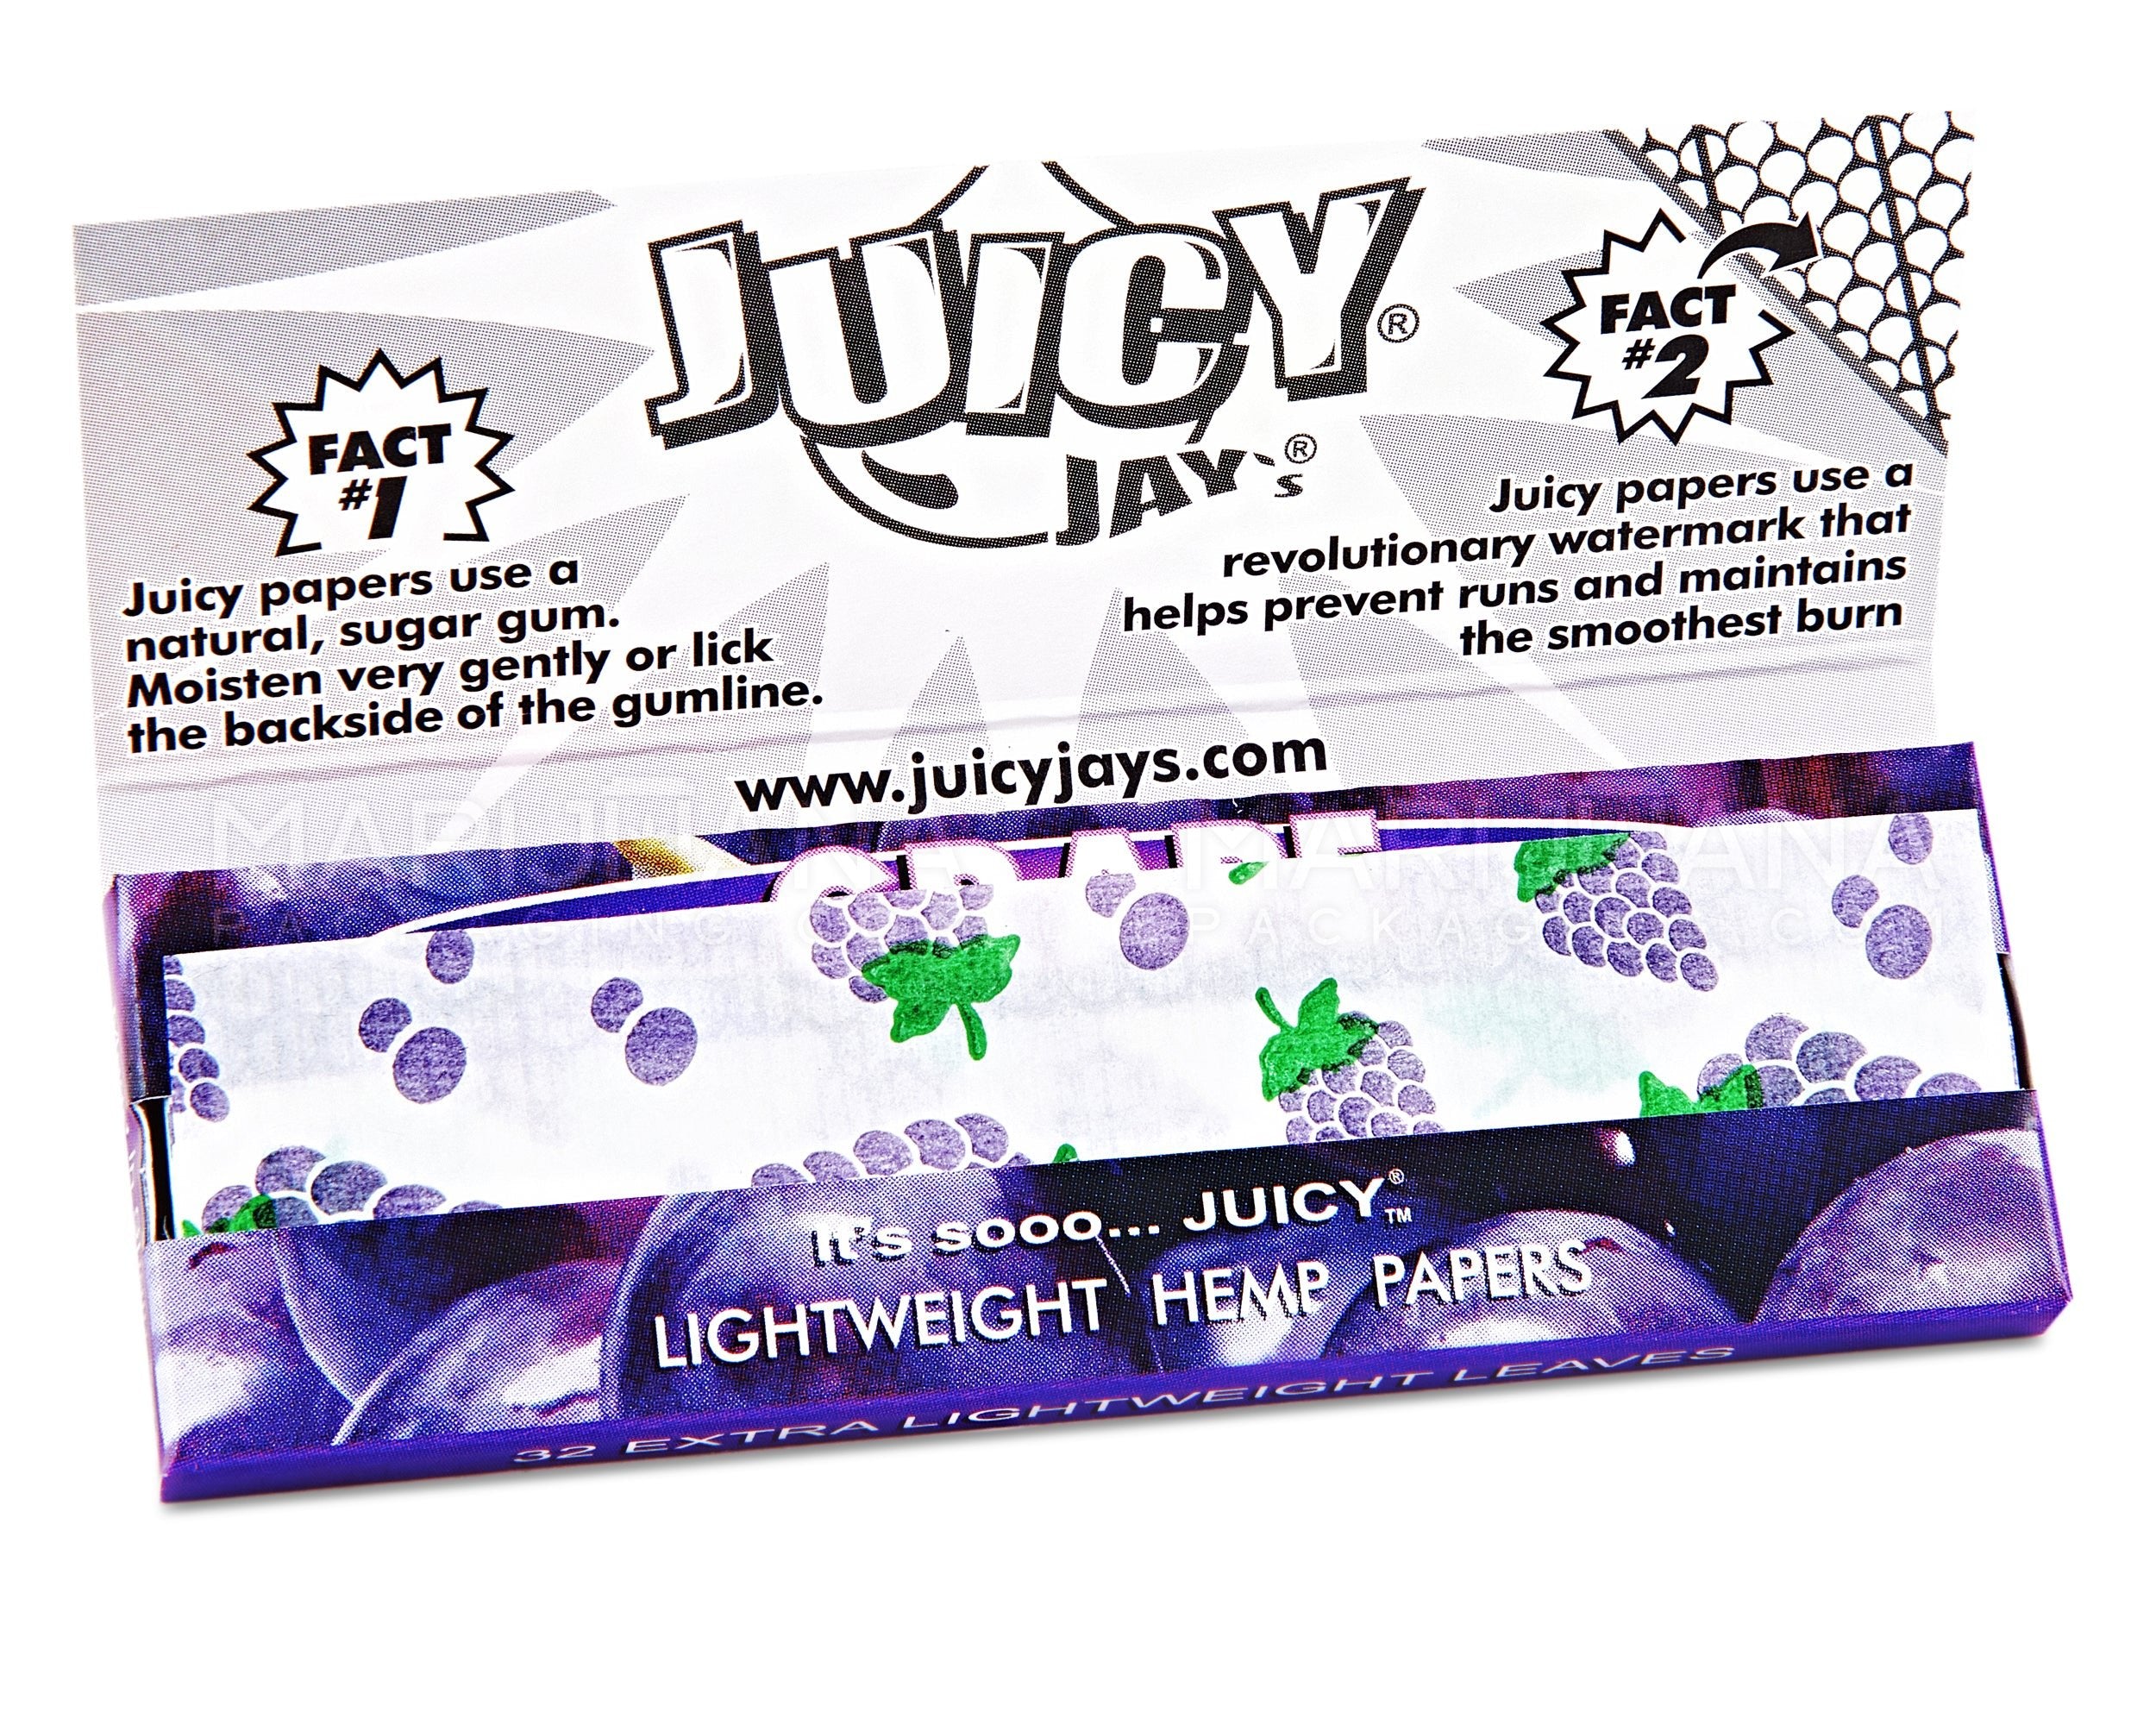 JUICY JAY'S | 'Retail Display' 1 1/4 Size Hemp Rolling Papers | 76mm - Grape - 24 Count - 3